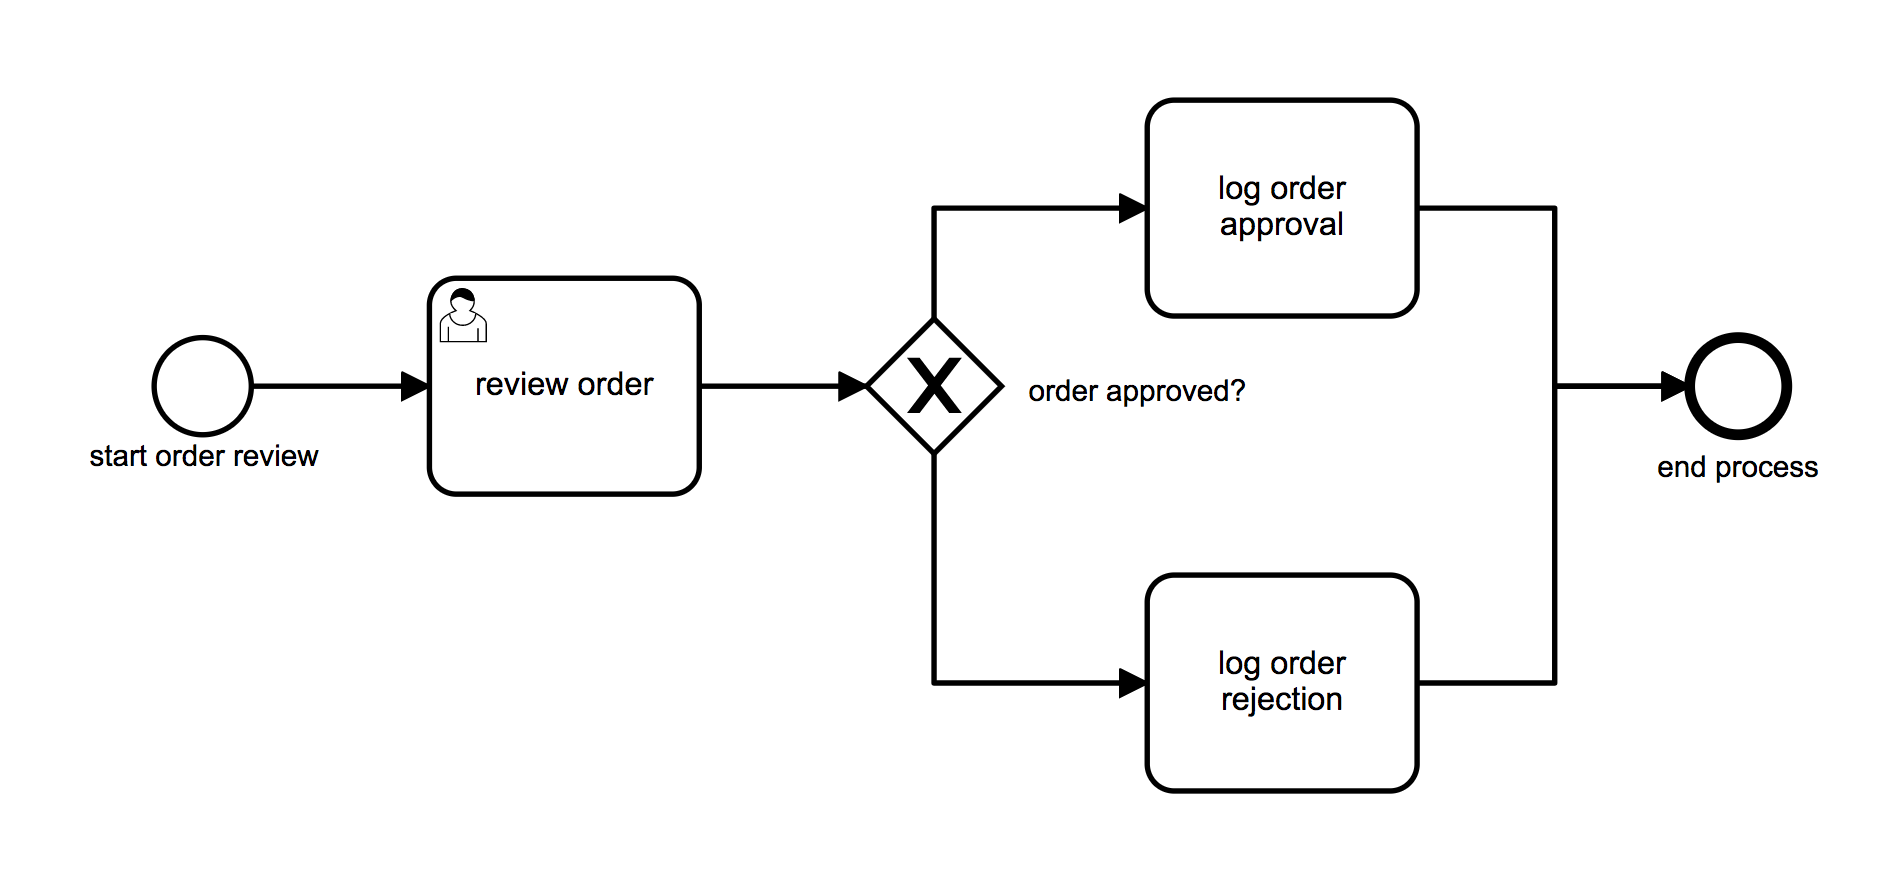 Can Manual Tasks Be Converted To User Tasks Bpmn